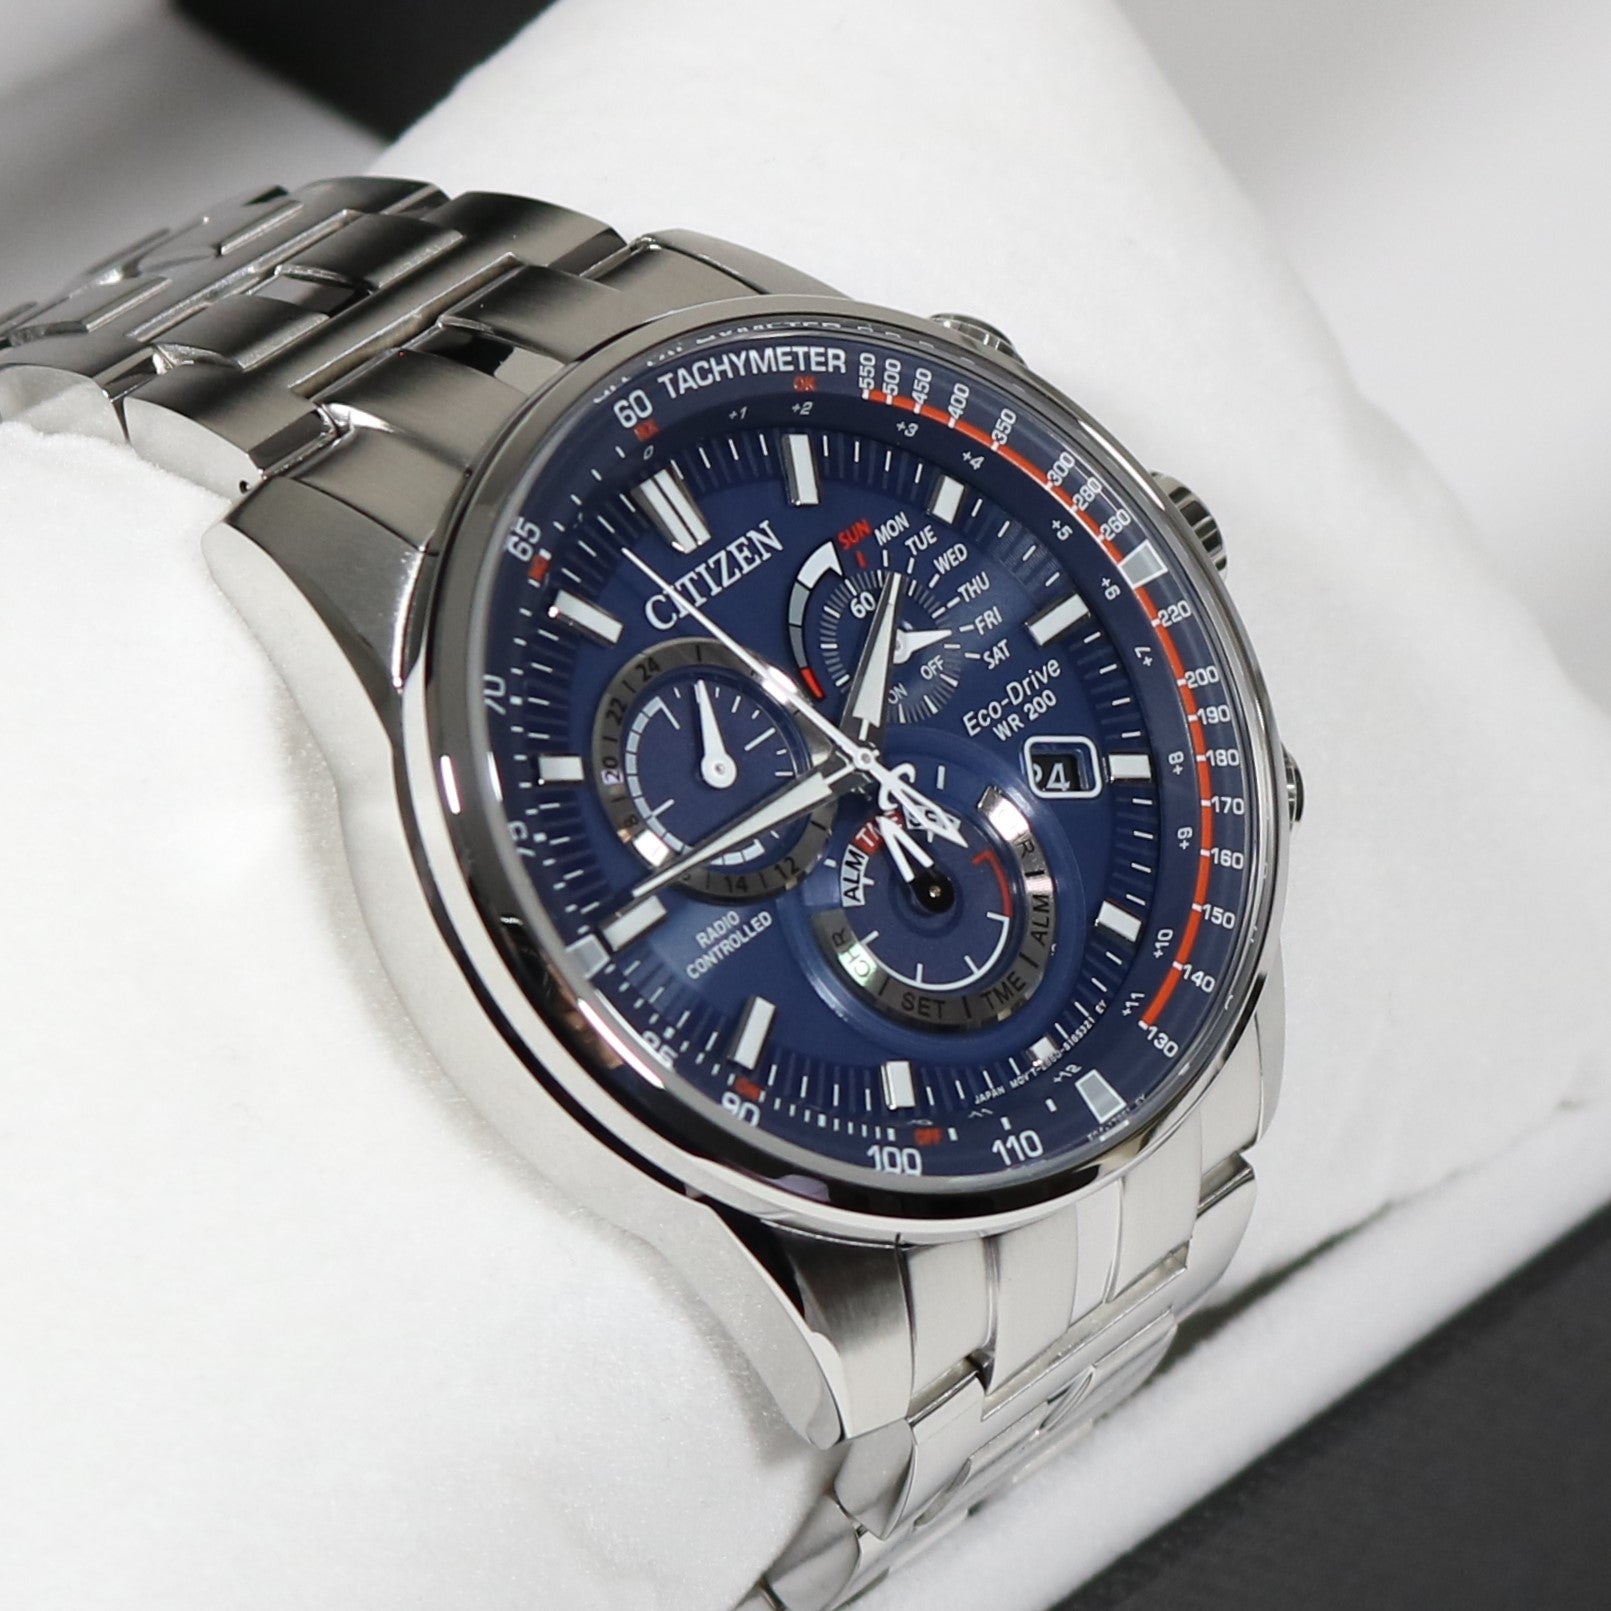 Citizen Eco-Drive Chronobuy CB5880-5 Watch PCAT Controlled Dial – Chronograph Blue